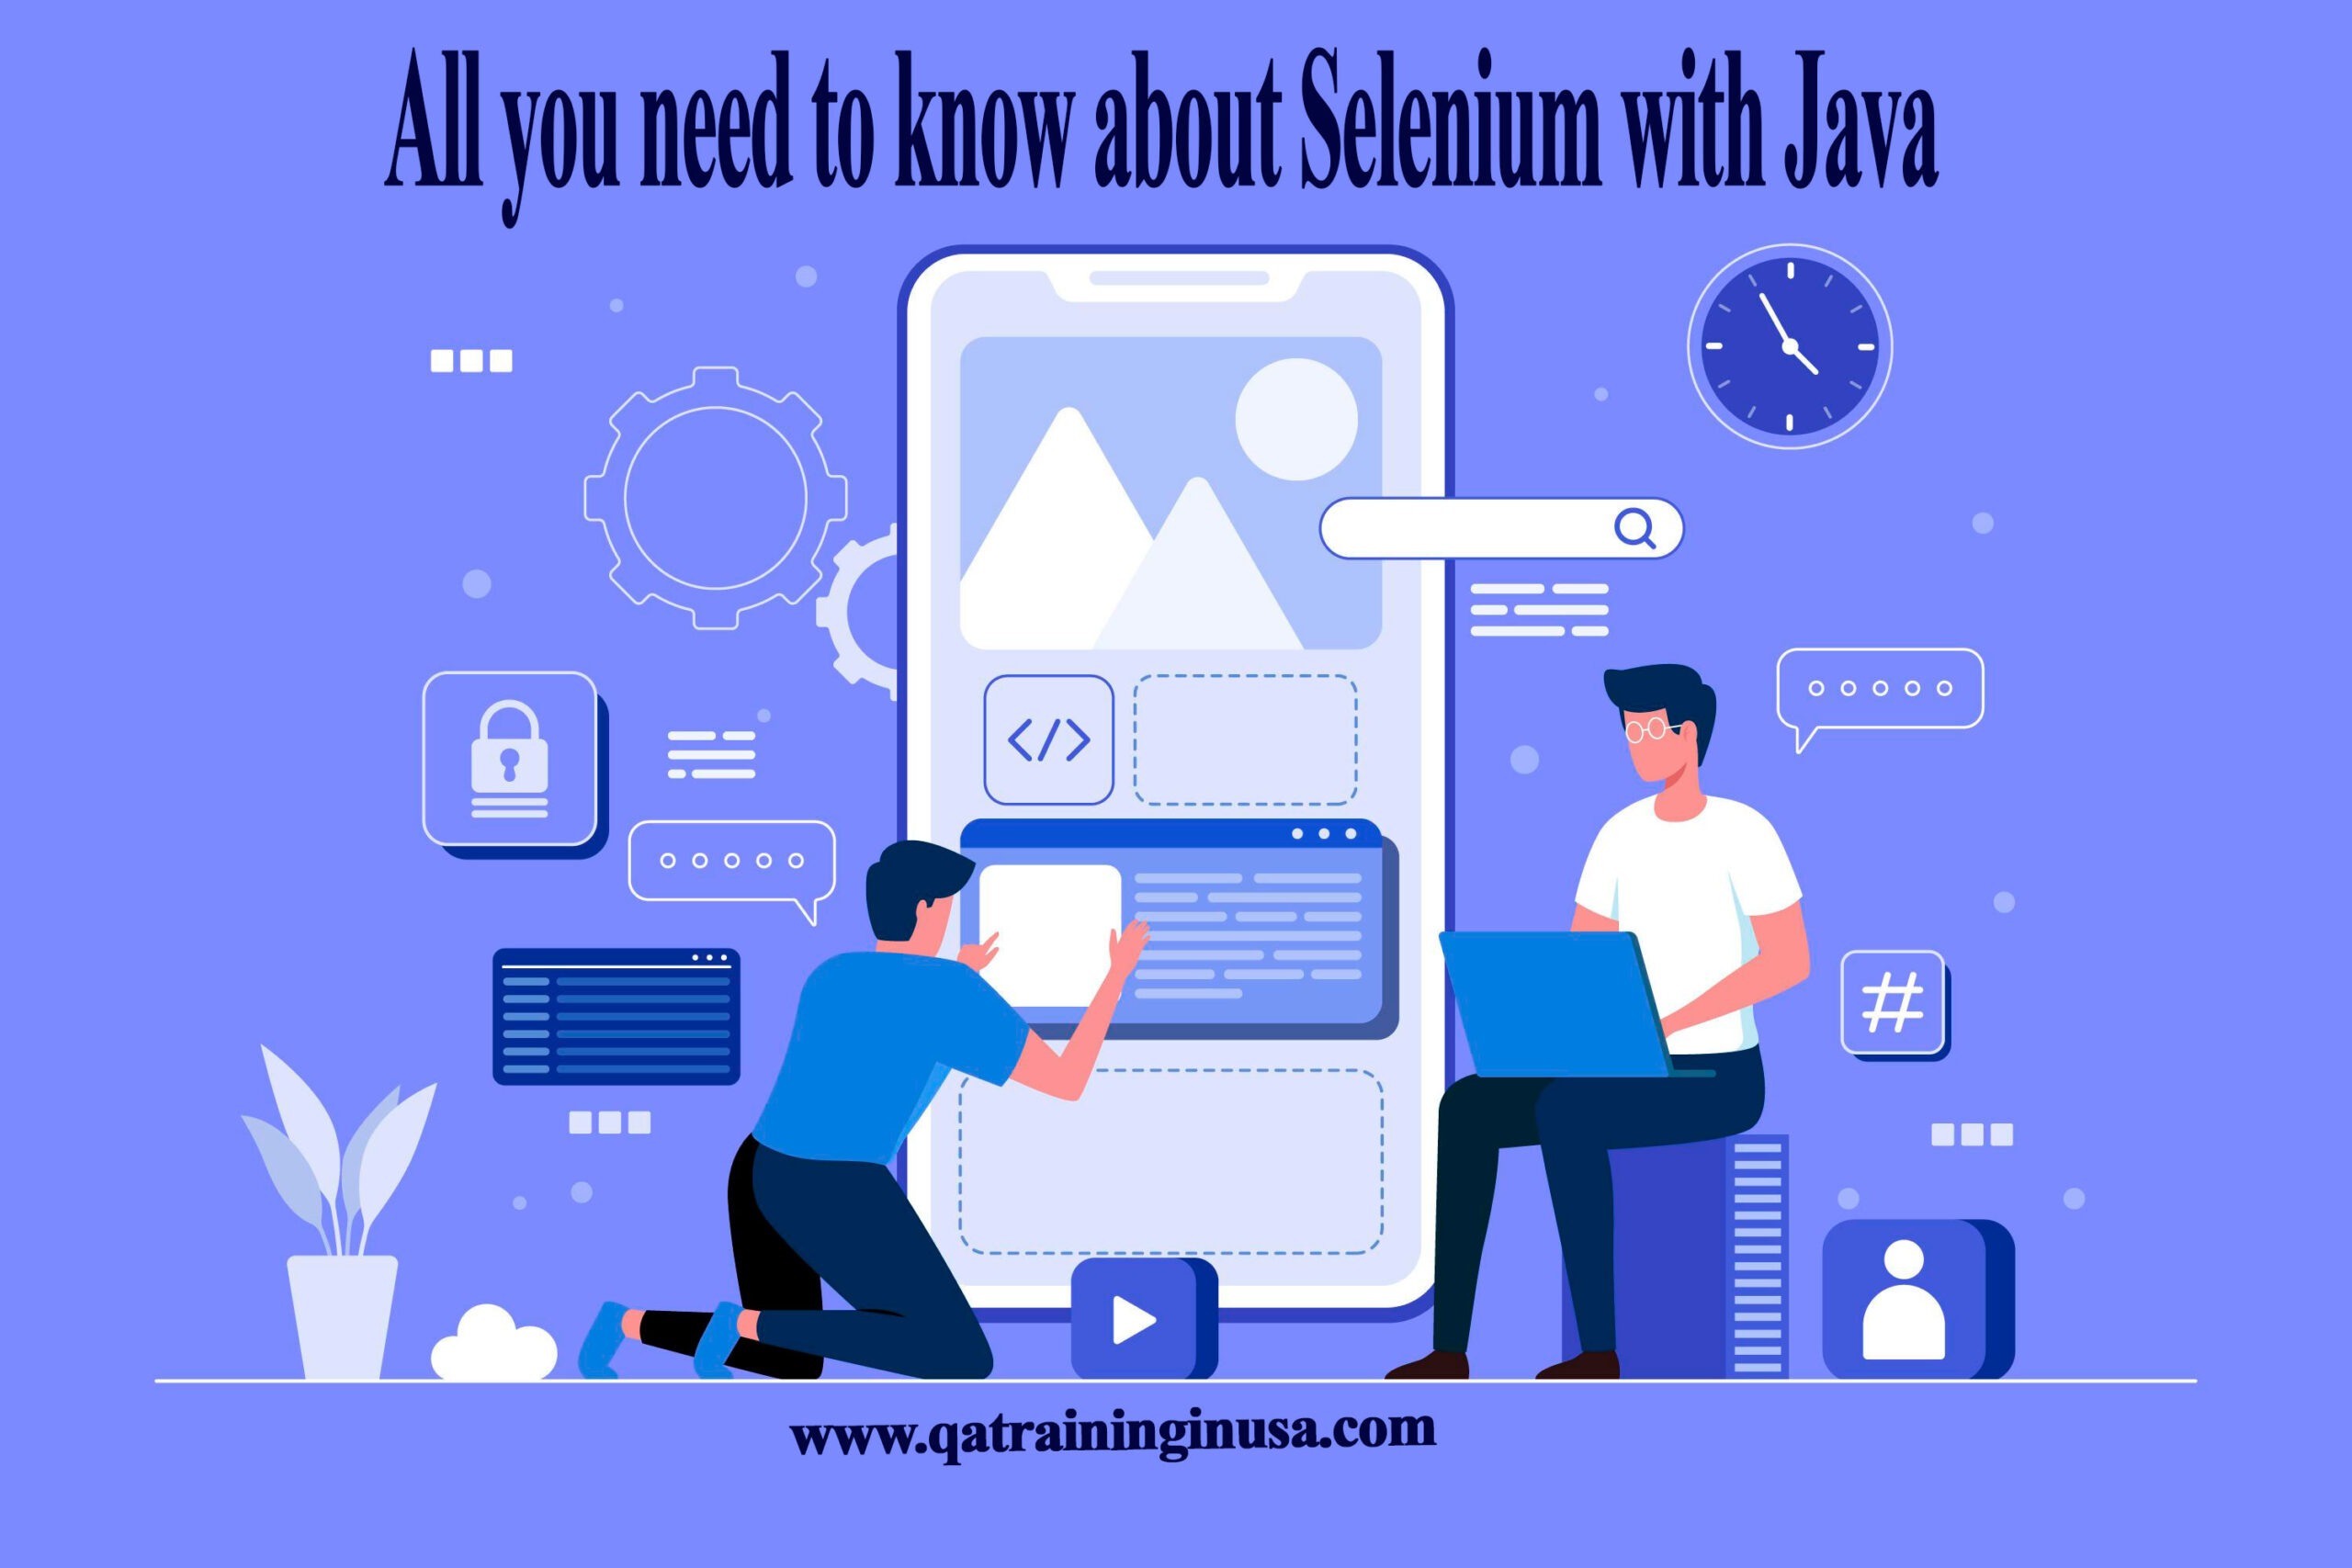 All you need to know about Selenium with Java